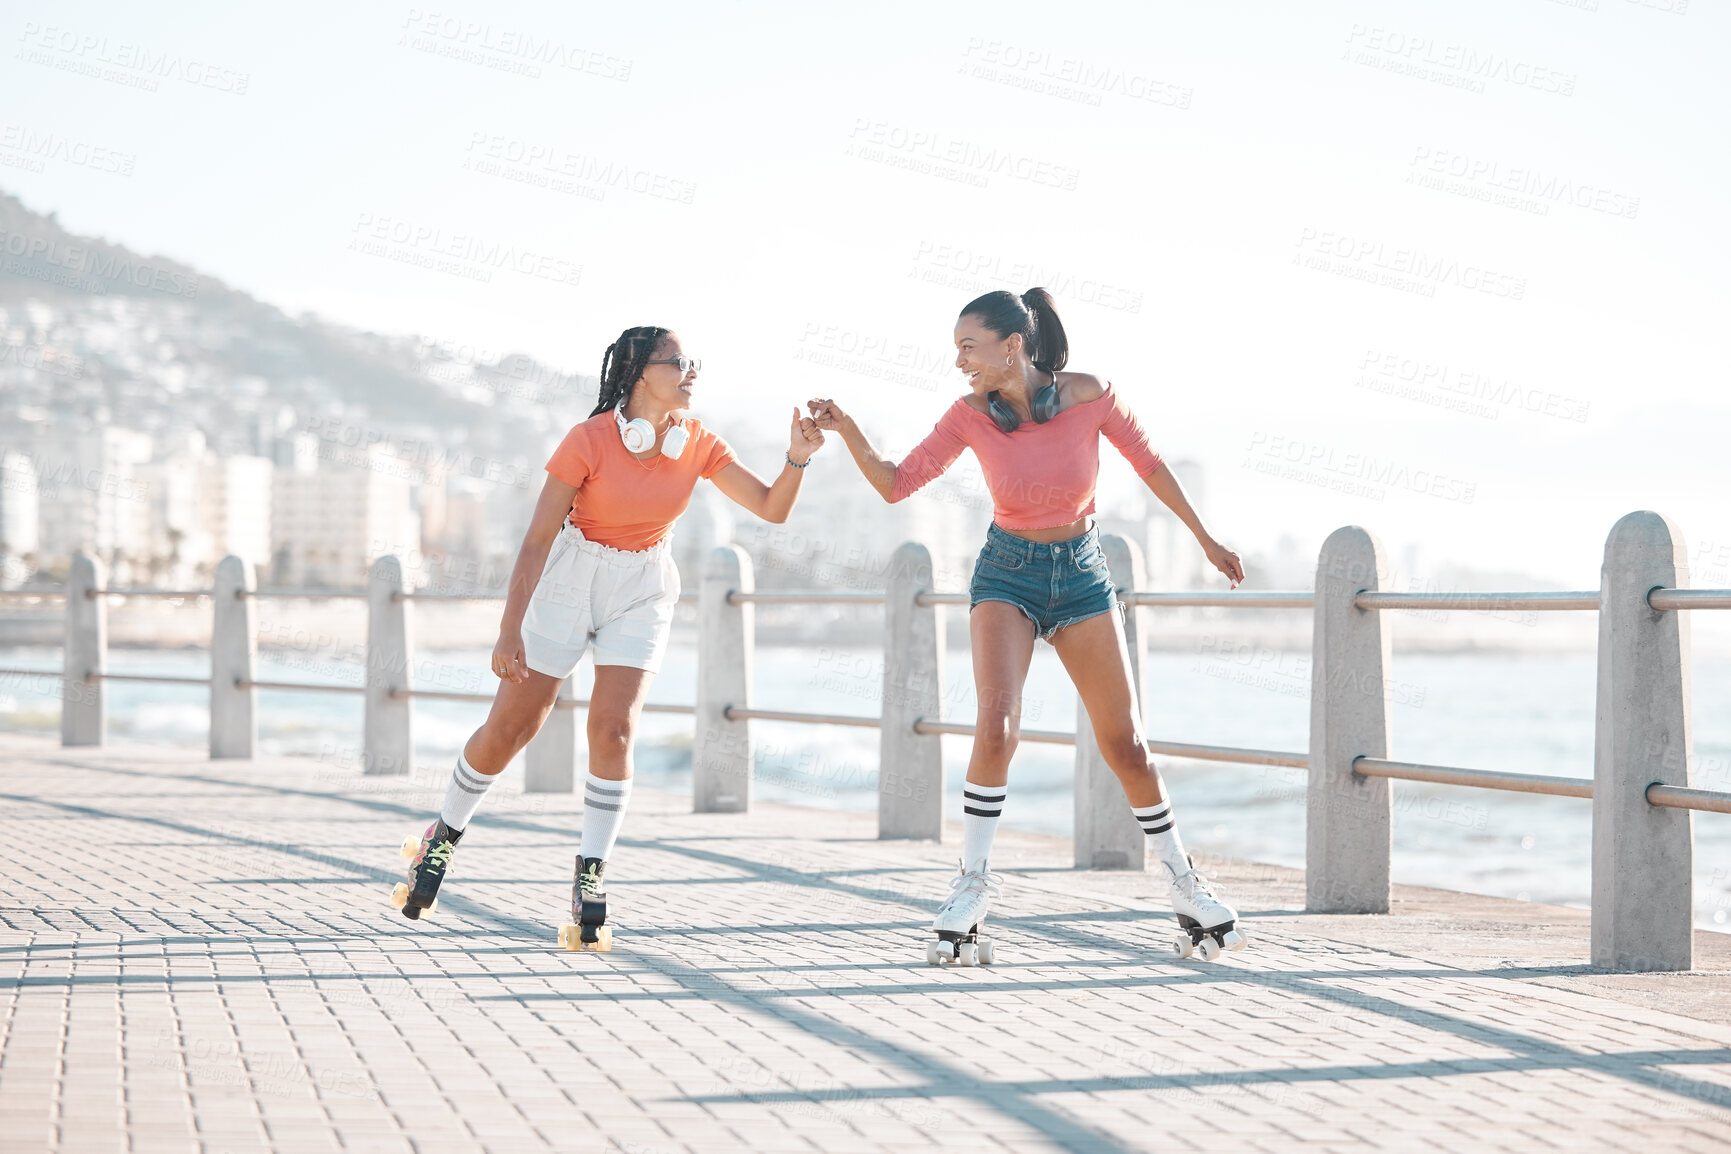 Buy stock photo Black women, fist bump and roller skating happy friends by the sea, ocean or shore outdoors. Support, partnership and girl team collaboration or fun while traveling down promenade together.

